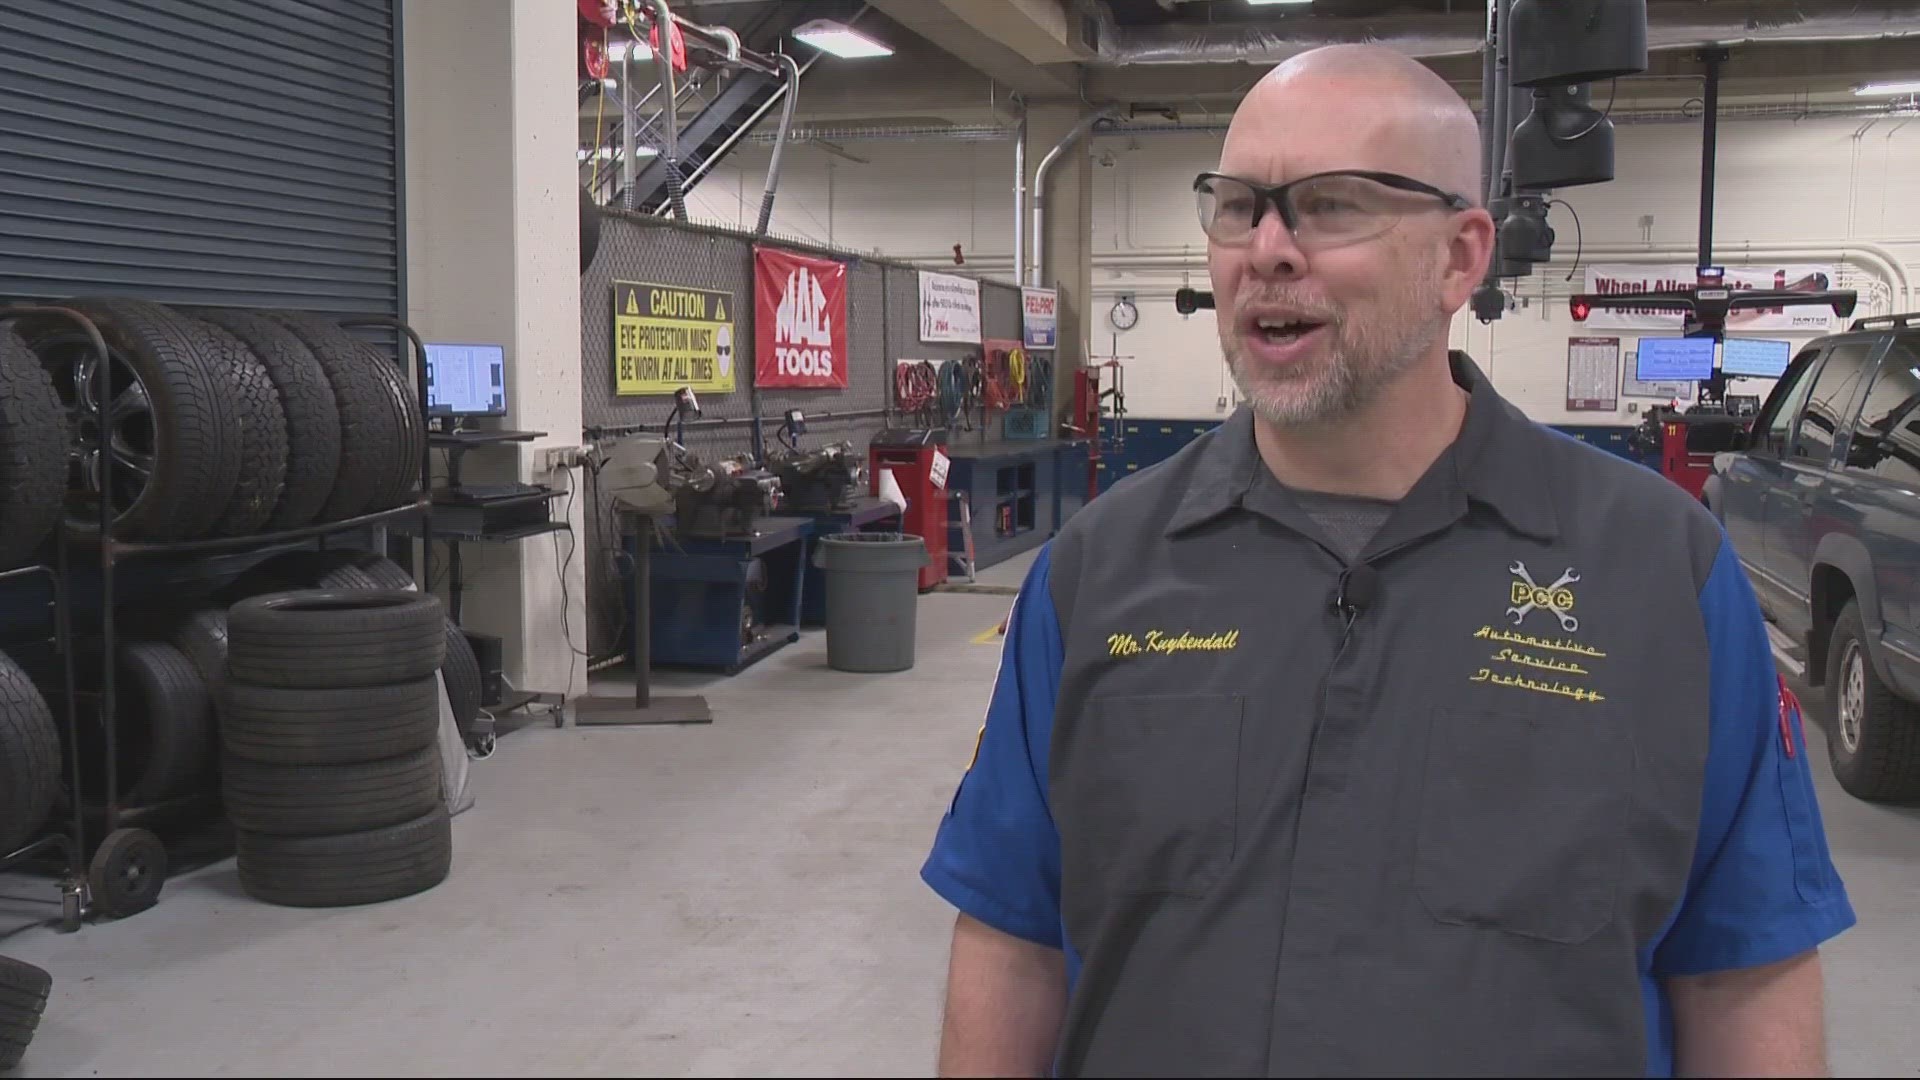 A big shortage of professional auto mechanics is a reality nationwide, including Portland. That could mean career opportunities for those willing to learn the trade.